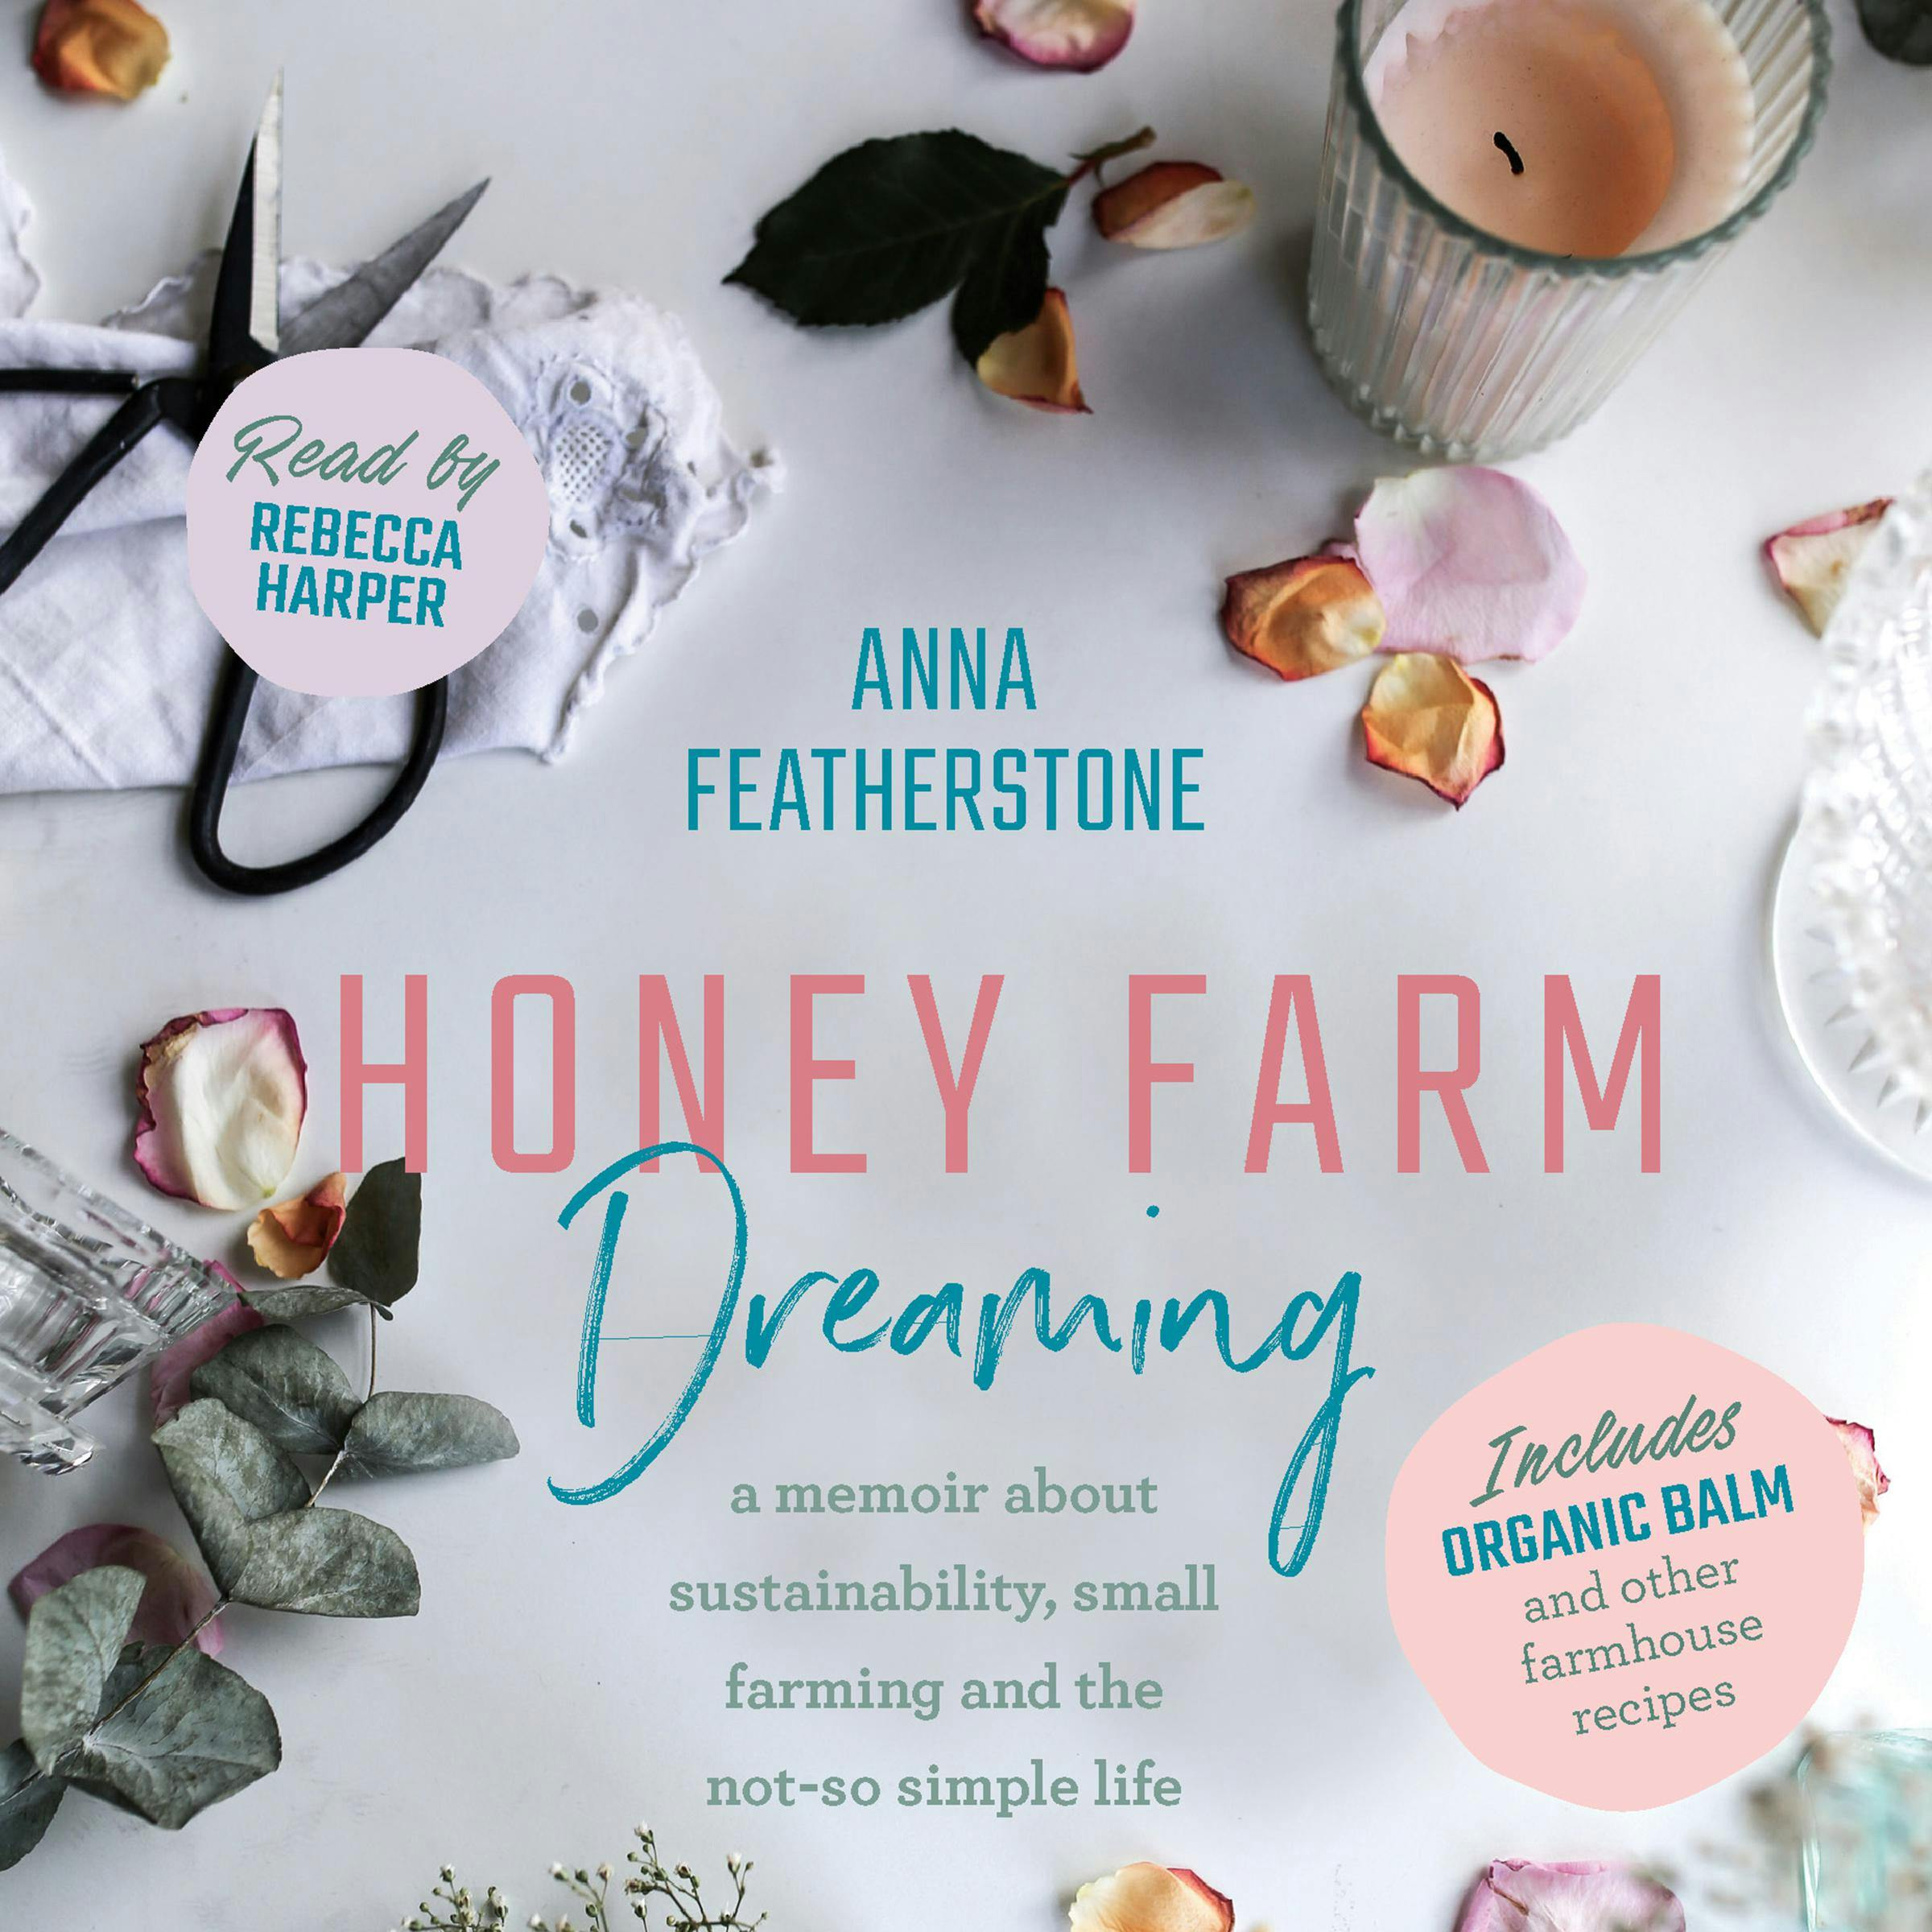 Honey Farm Dreaming: A Memoir About Sustainability, Small Farming and the Not-So Simple Life - Anna Featherstone